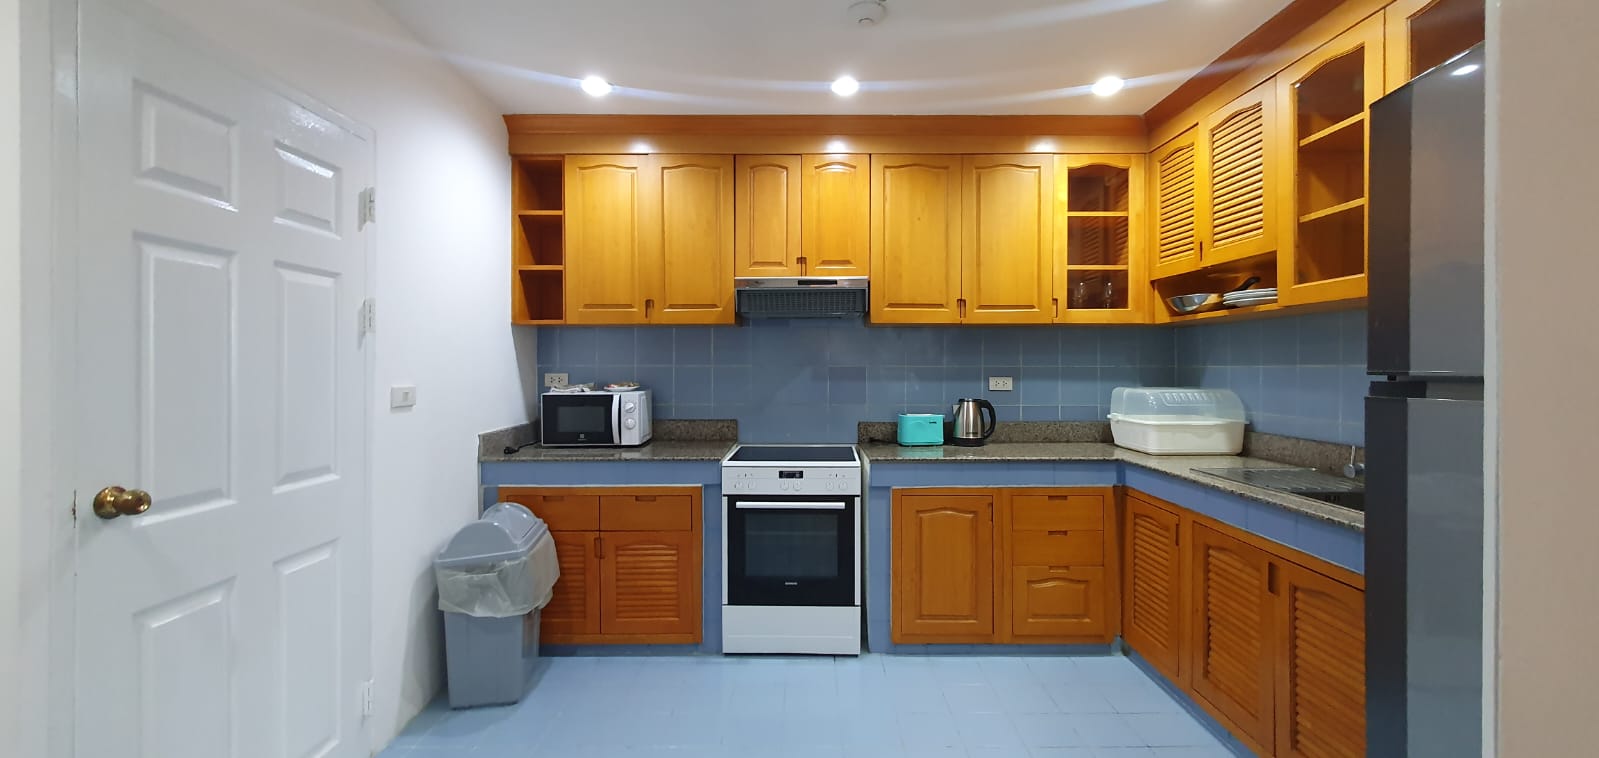 3 bedrooms, 3 bathrooms +1 maid room 273sqm size at Trinity Complex For Rent 55KTHB